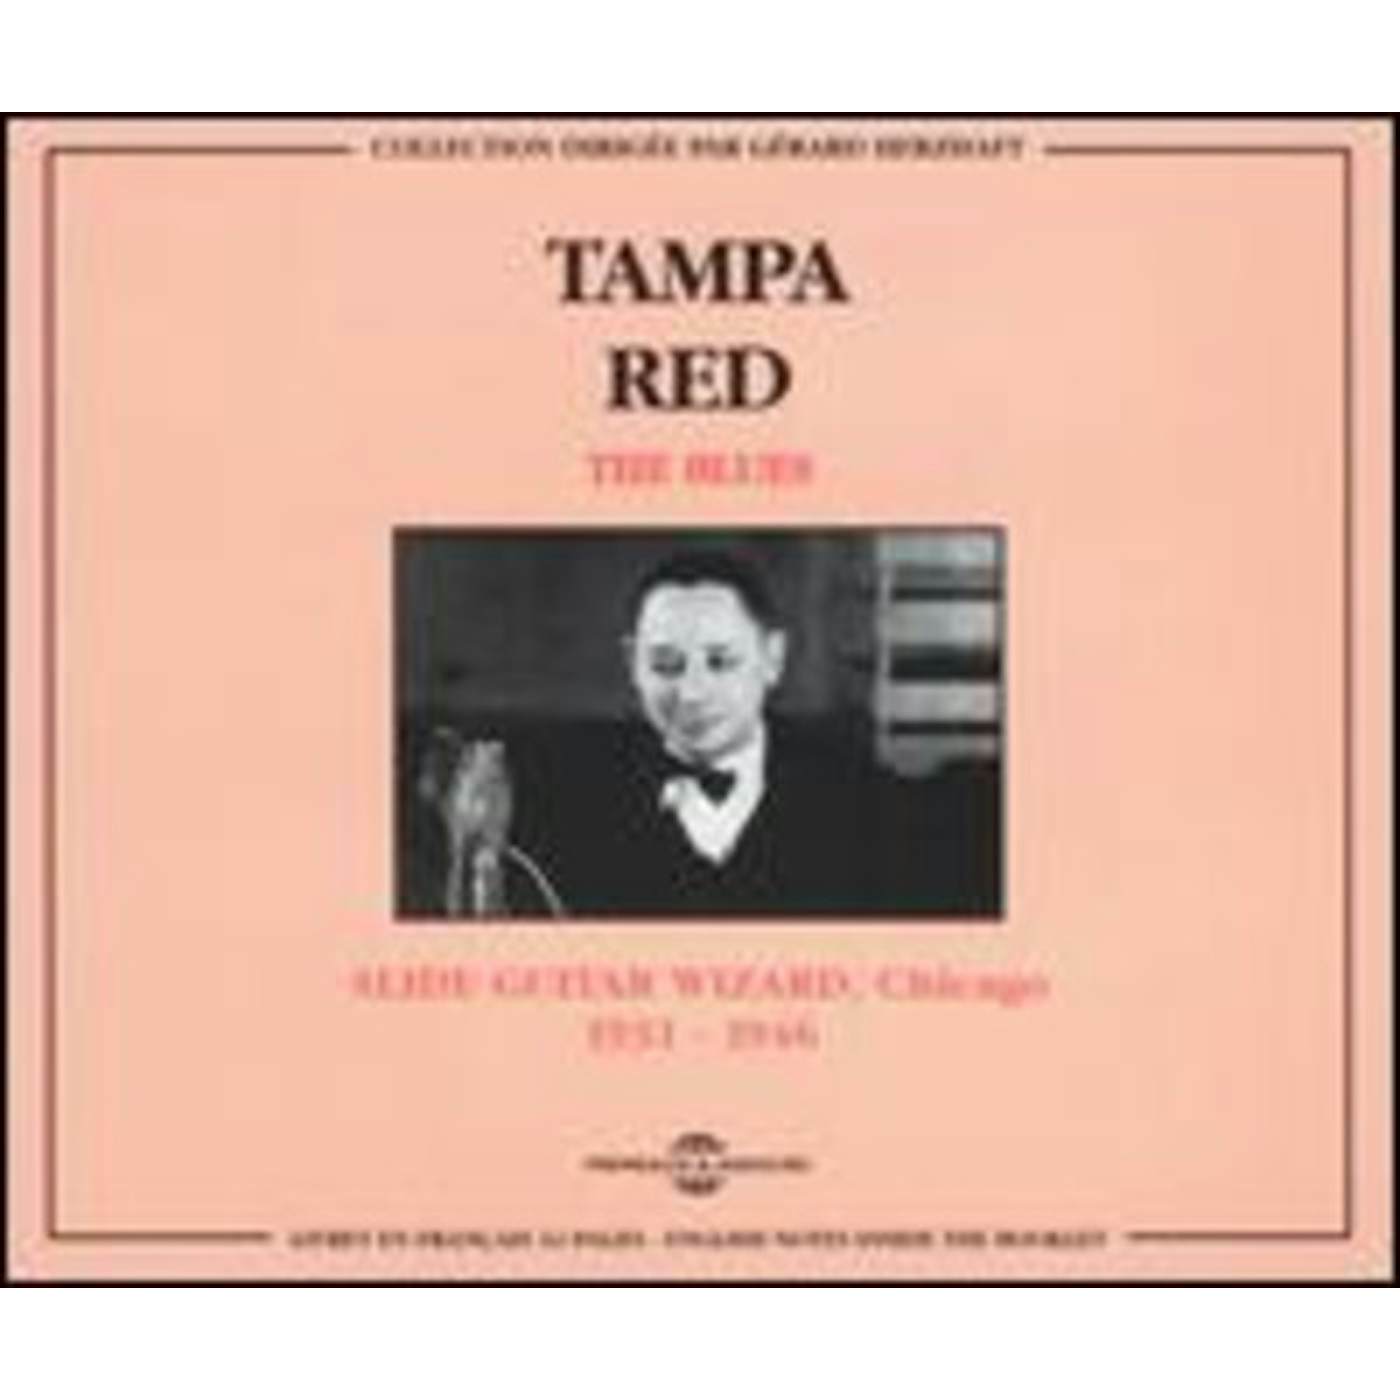 Tampa Red BLUES: SLIDE GUITAR WIZARD CHICAGO 1931-1946 CD